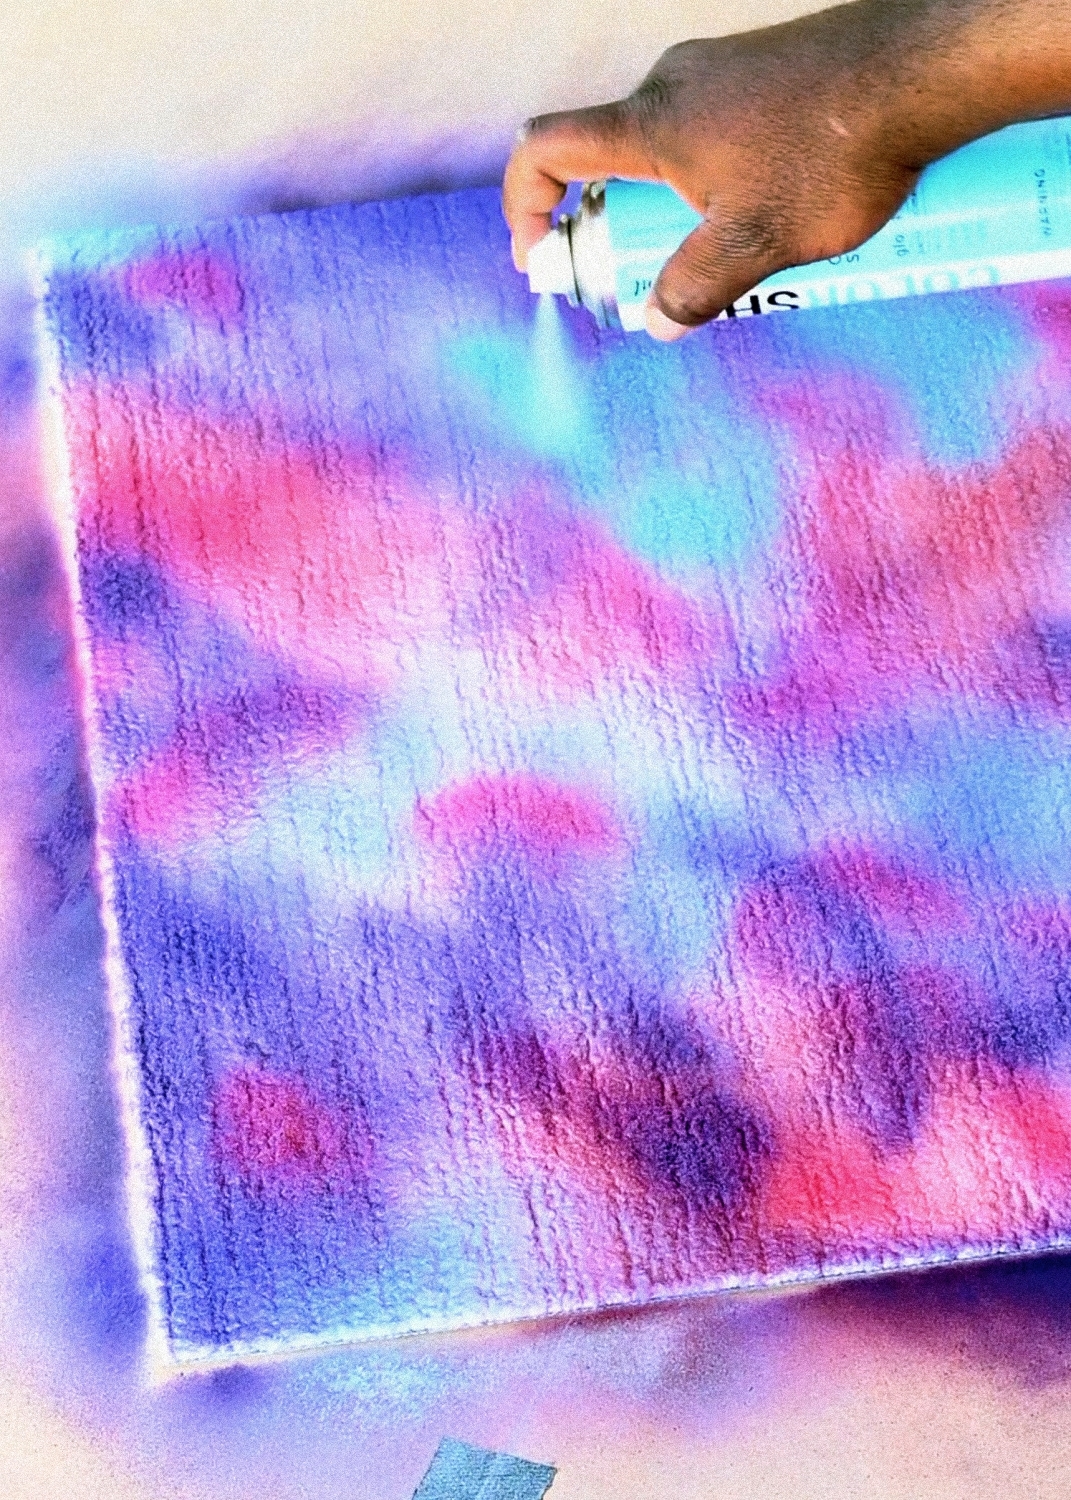 Spray paint rug with blue, pink, and purple paints